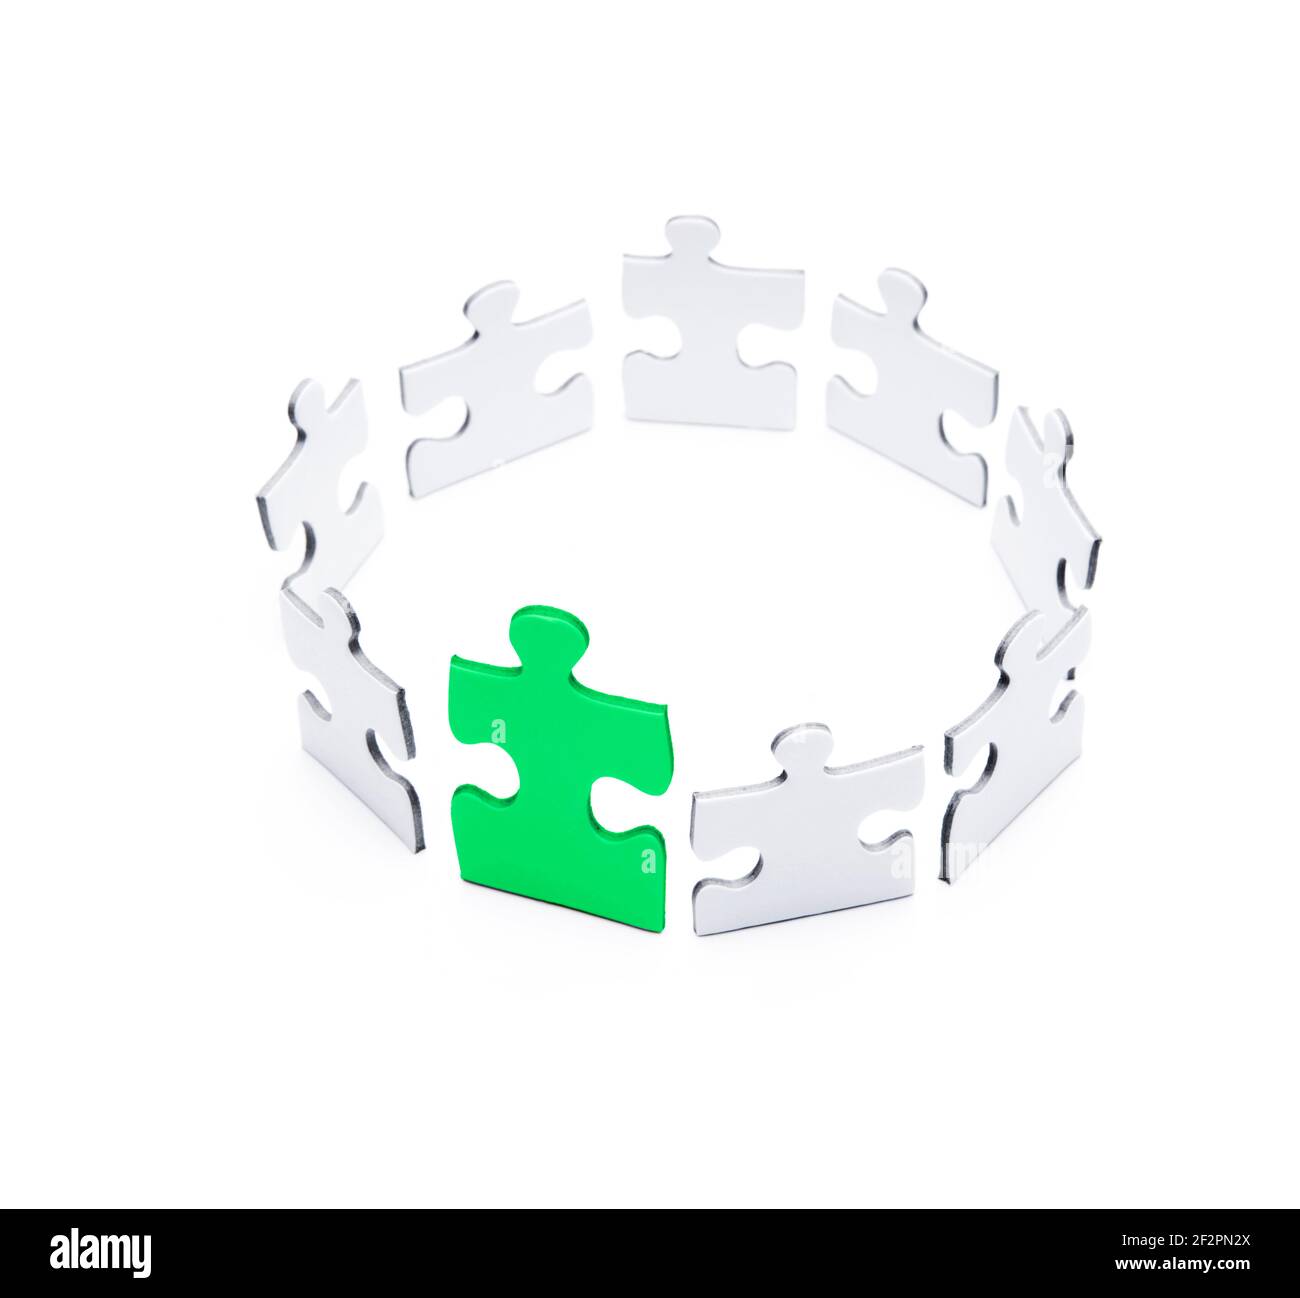 Puzzle pieces arranged in a circle Stock Photo